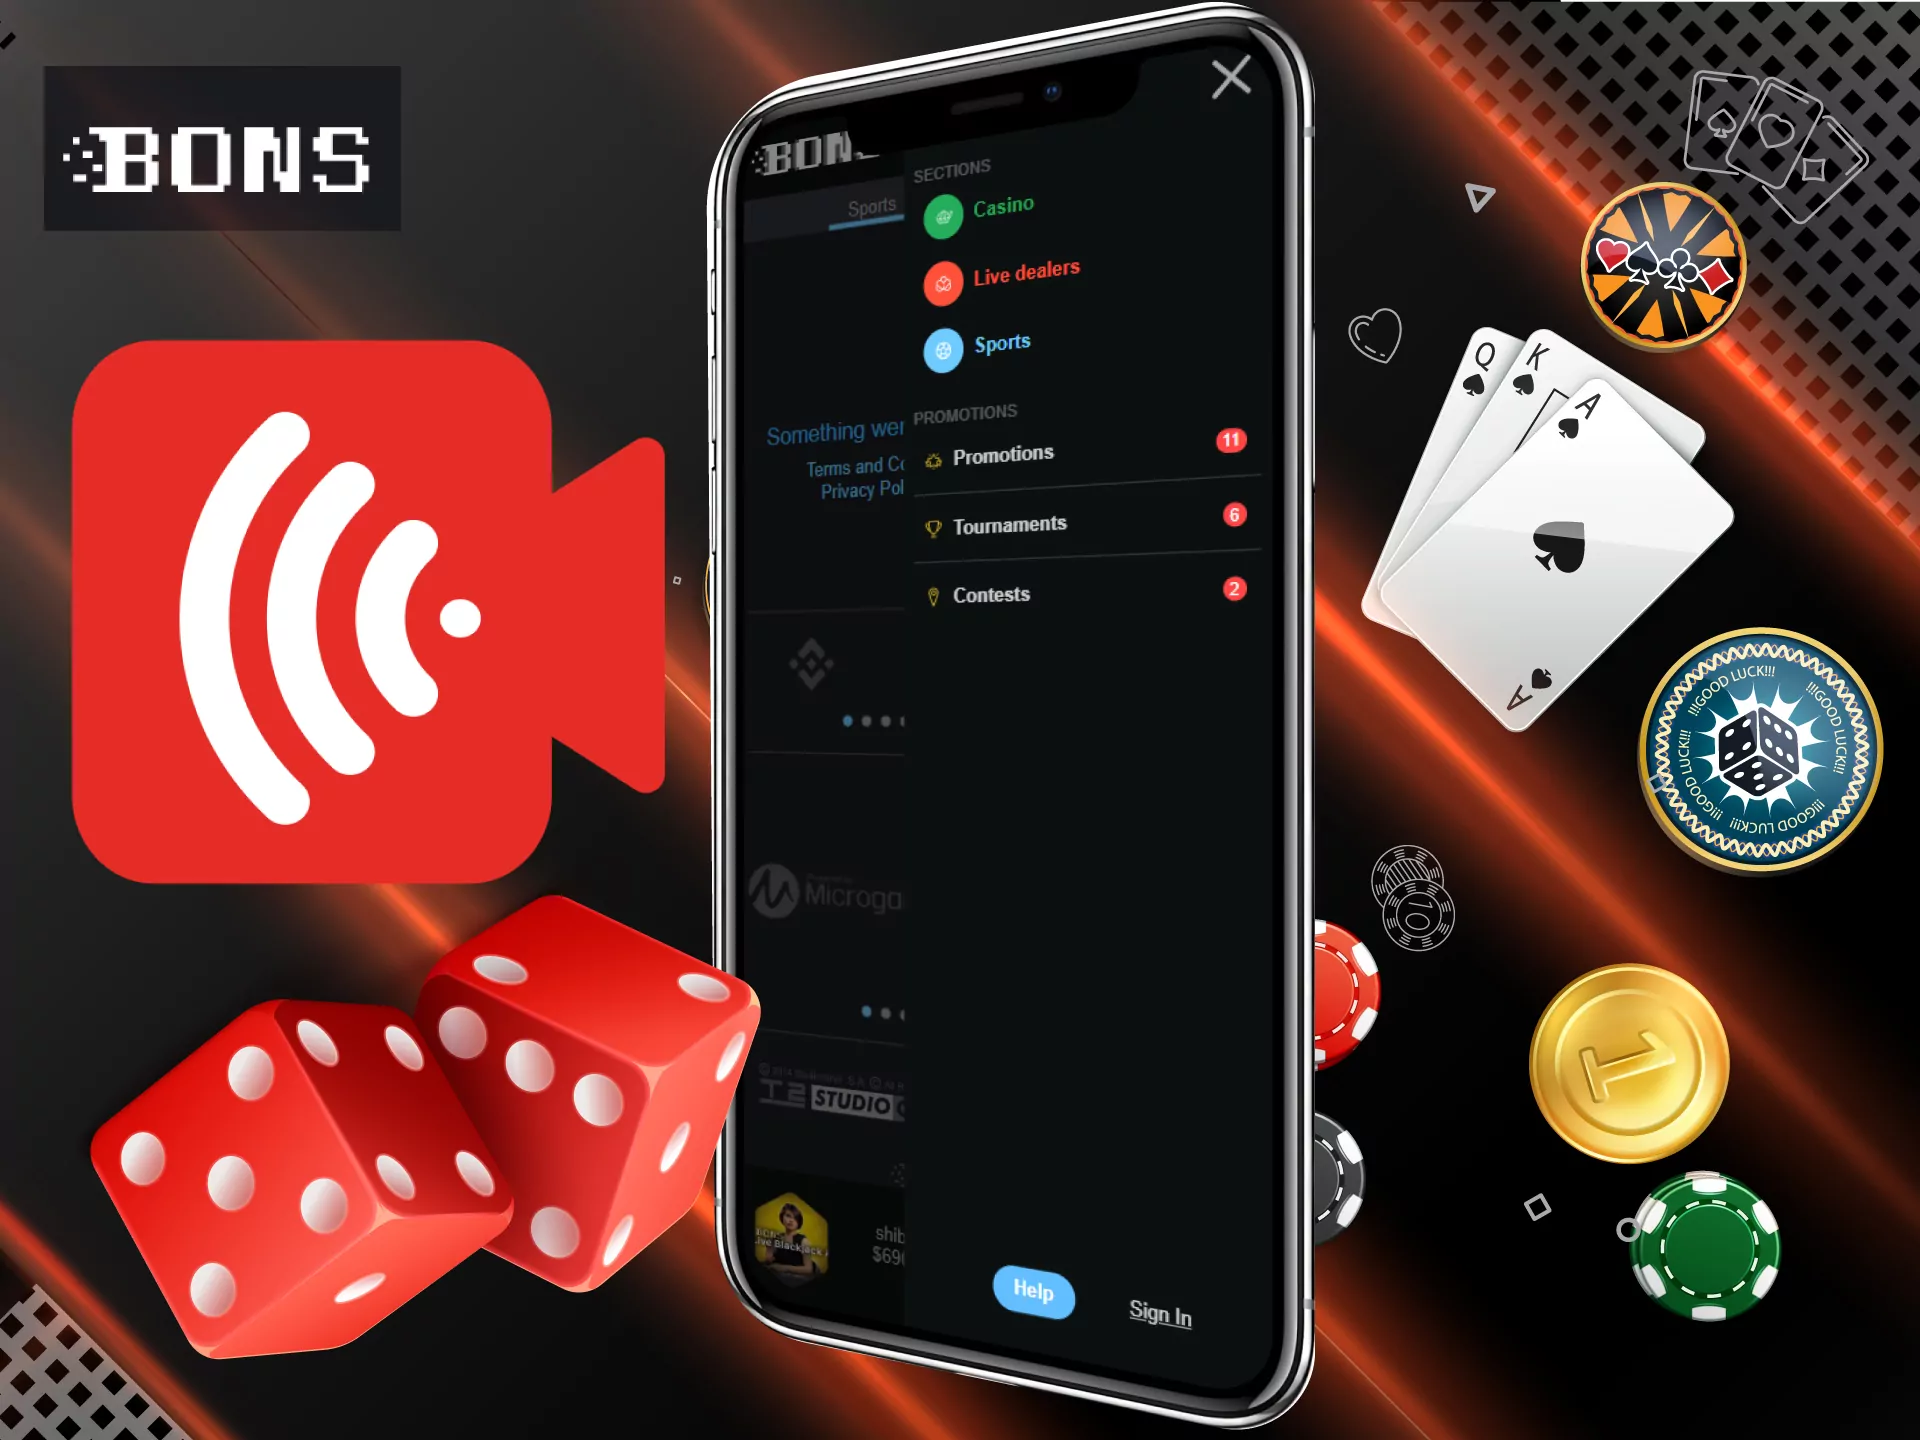 Play casino games against the real dealers at Bons.